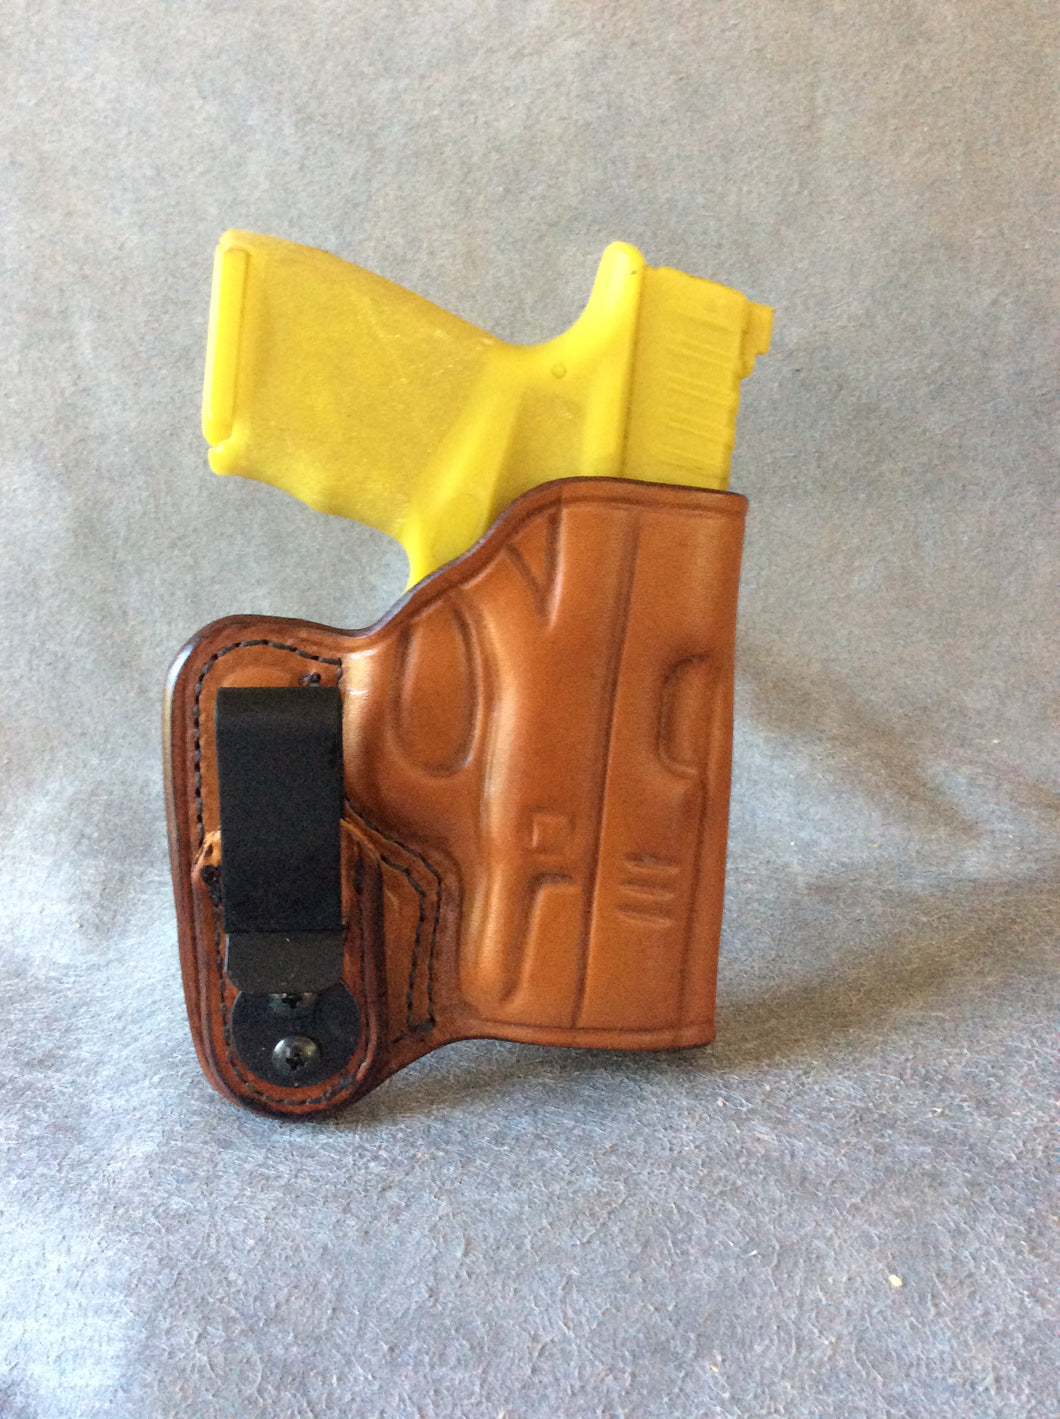 Springfield Armory Hellcat IWB Concealed Tuckable Custom Leather Holster